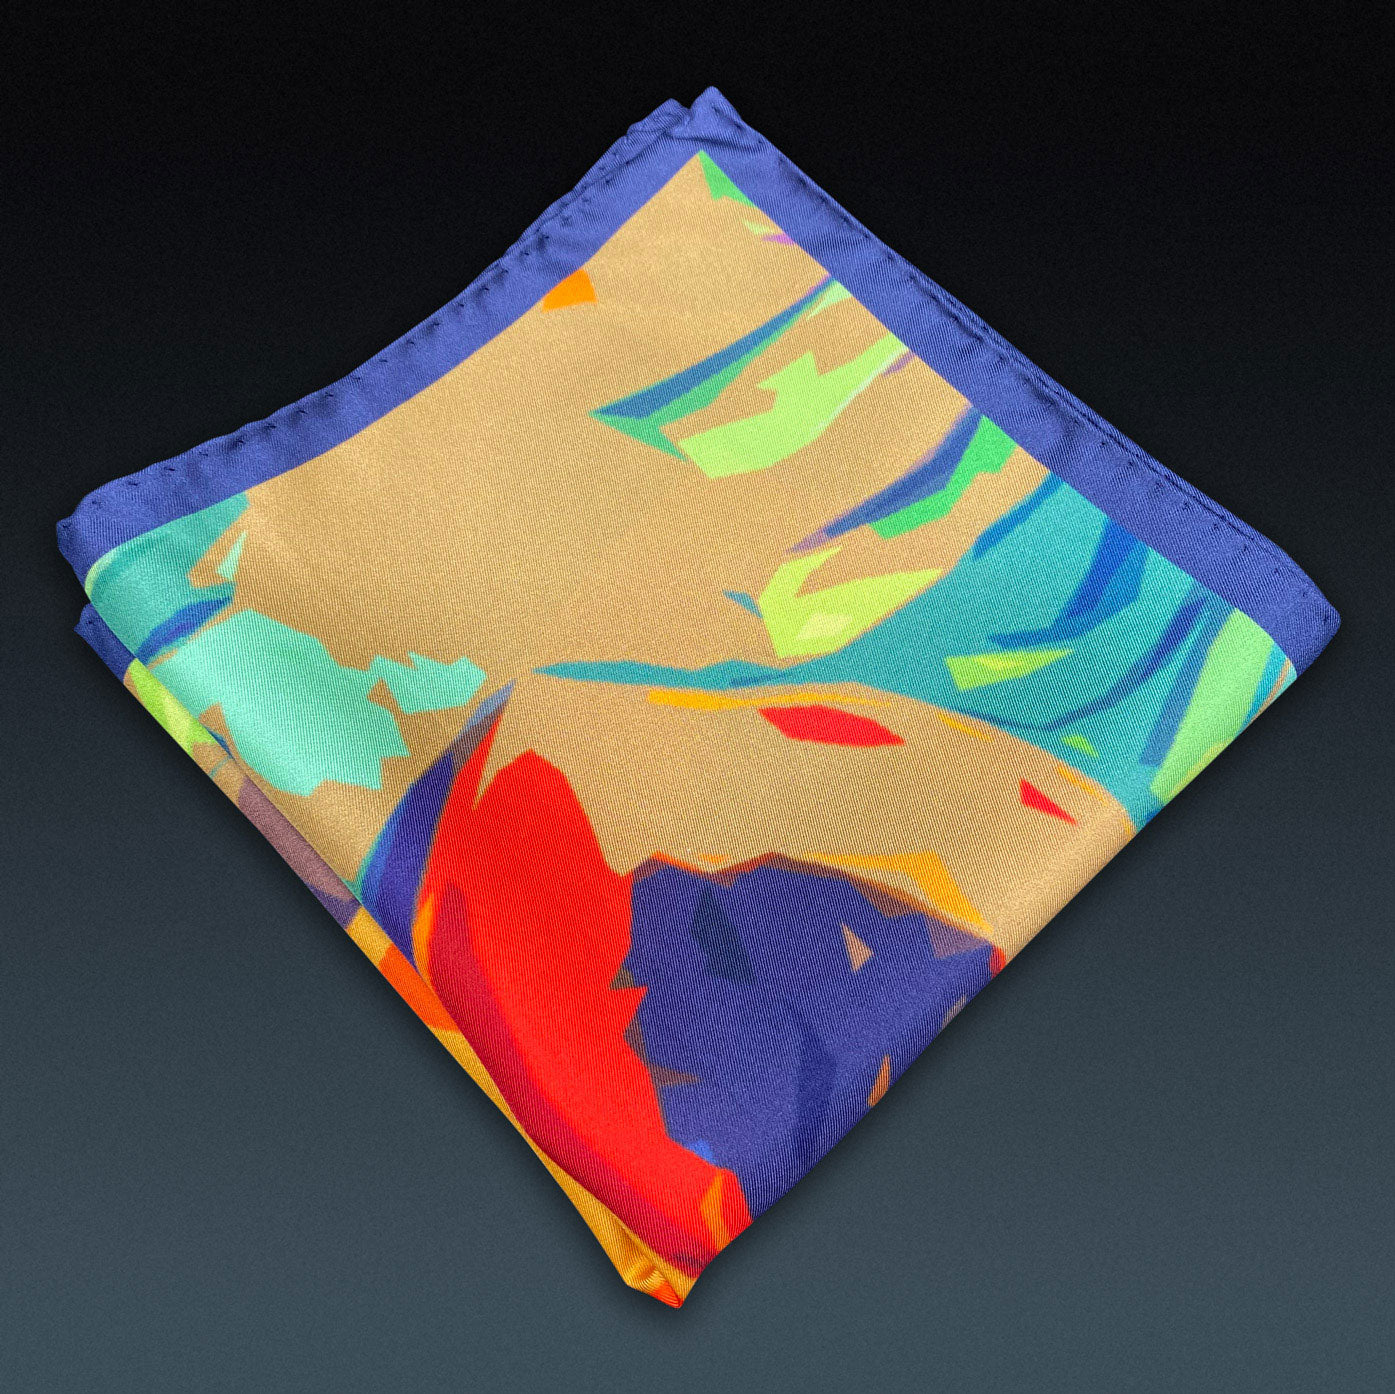 Folded 'Derwent' silk pocket square from SOHO Scarves, showing the striking tropical pattern on a dark background.